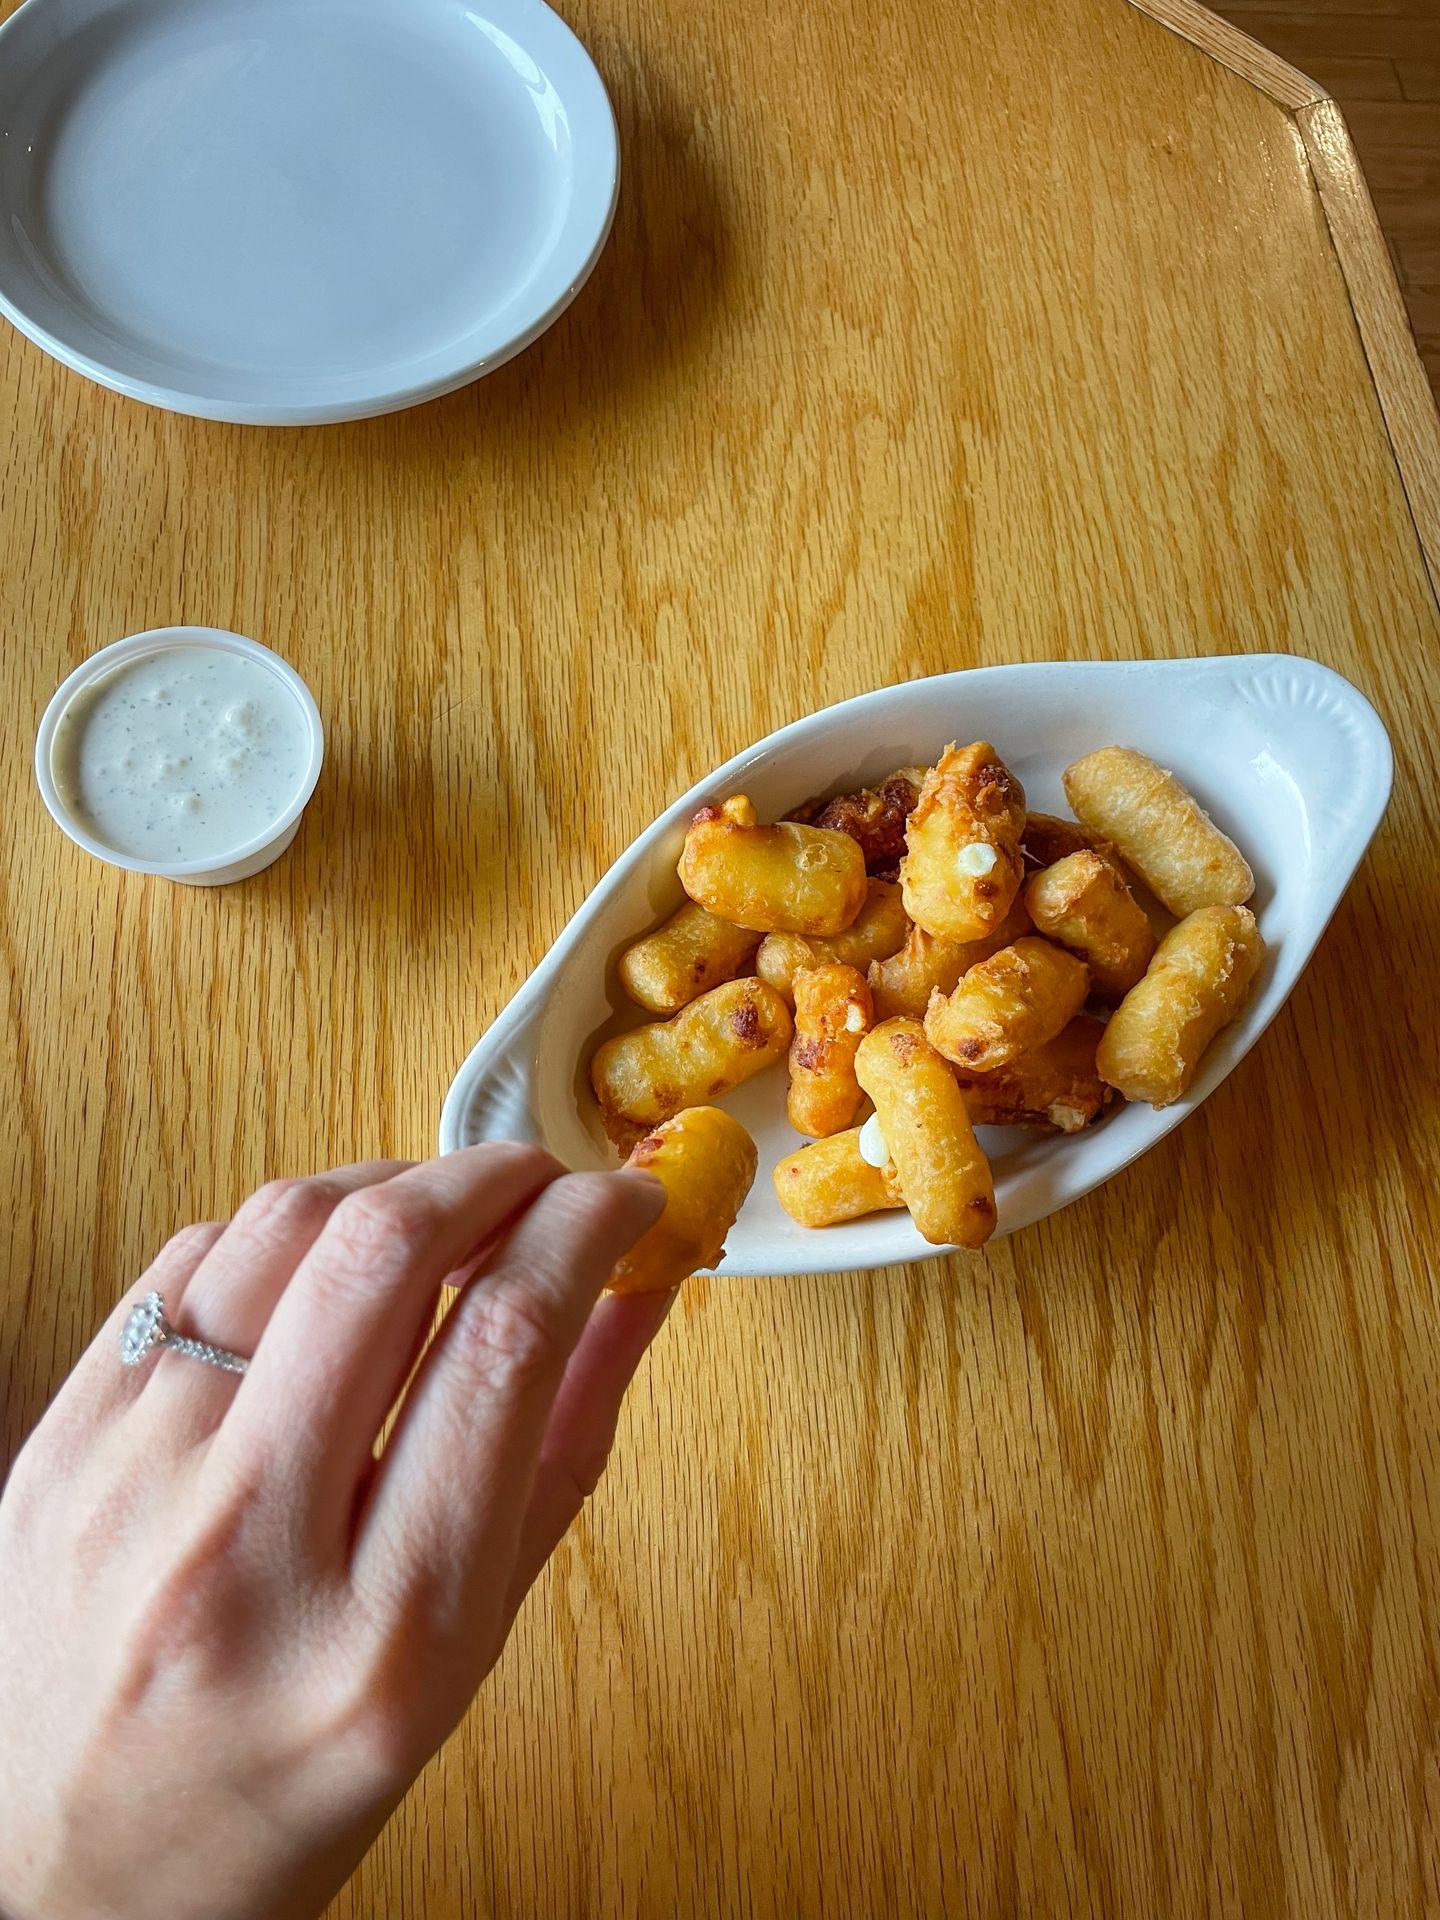 Looking down at a hand picking up a fried cheese curd from a dish in the Grumpy Troll Brew Pub